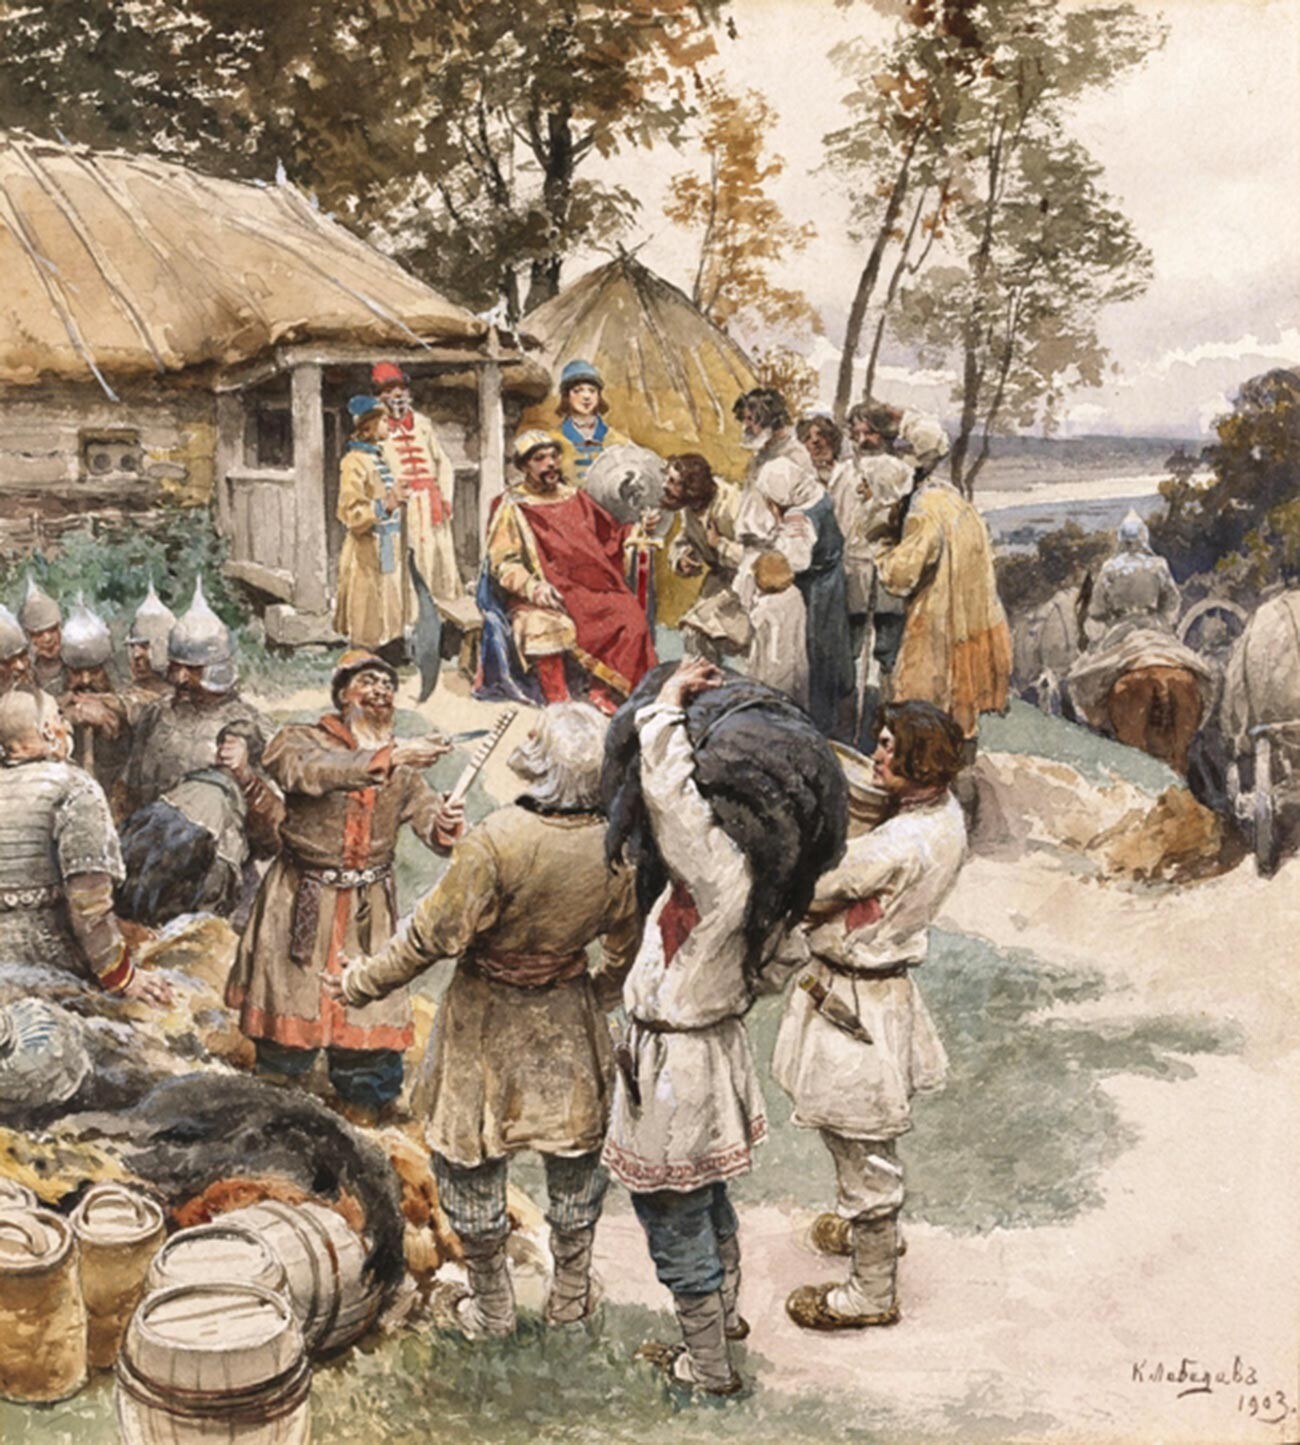 Prince Igor collects a tribute from Drevlyans in 945. In the year 945, Kiev prince Igor arbitrarily increased the collection of tribute from the tribe of Drevlyans, which led to the revolt of the latter and the murder of the ruler himself. 